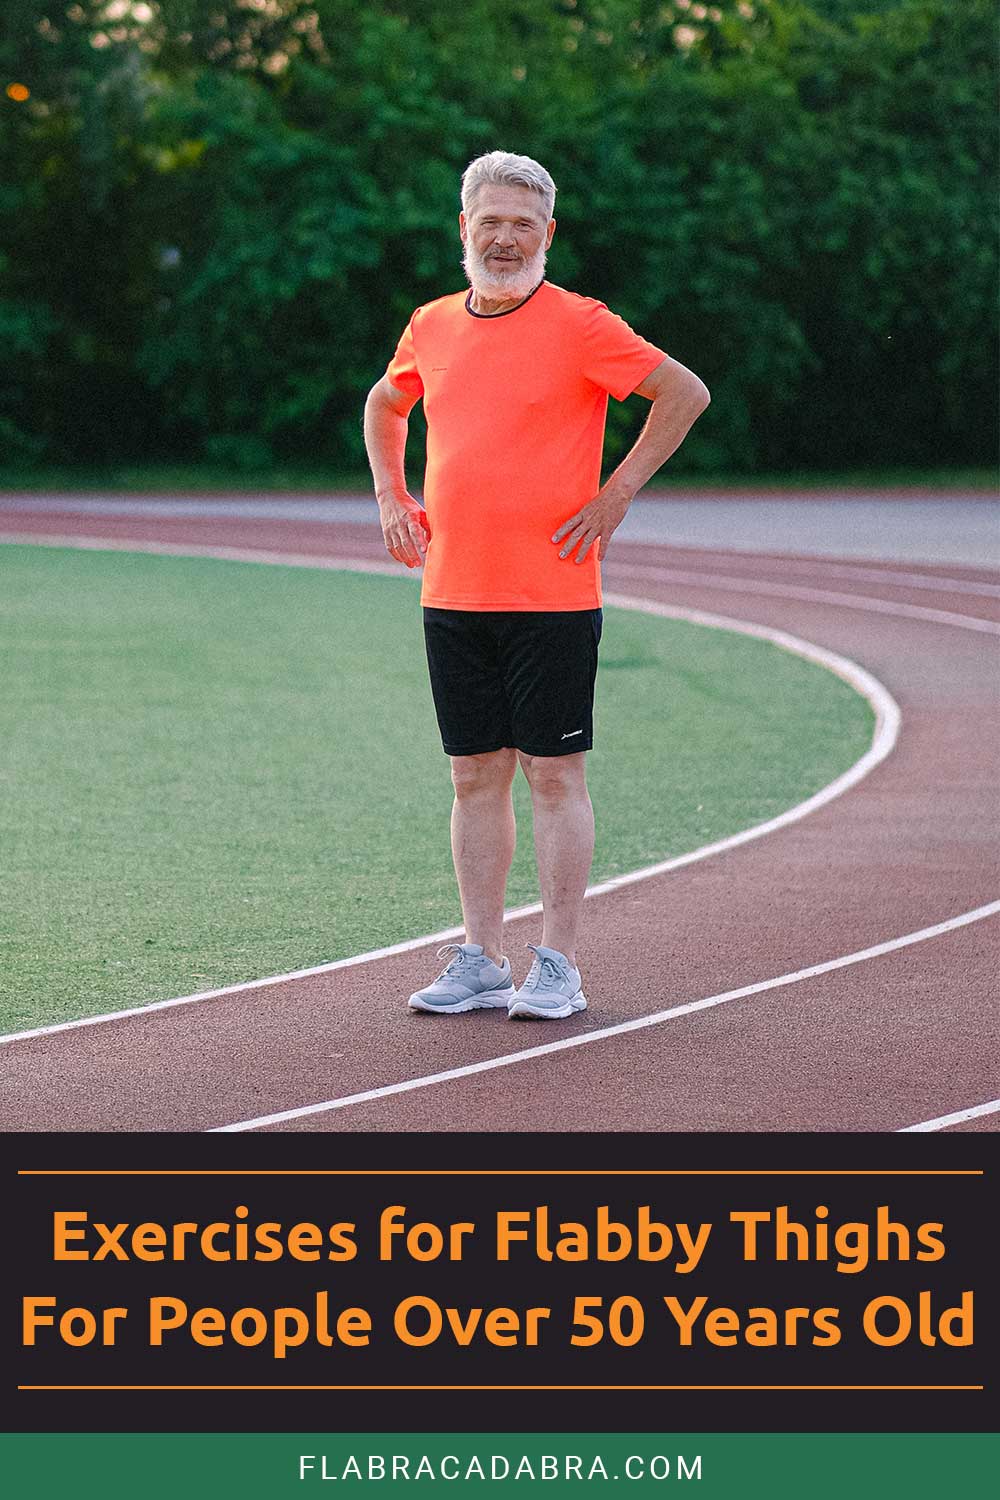 Old man in sportswear on a race course - Exercises for Flabby Thighs For People Over 50 Years Old